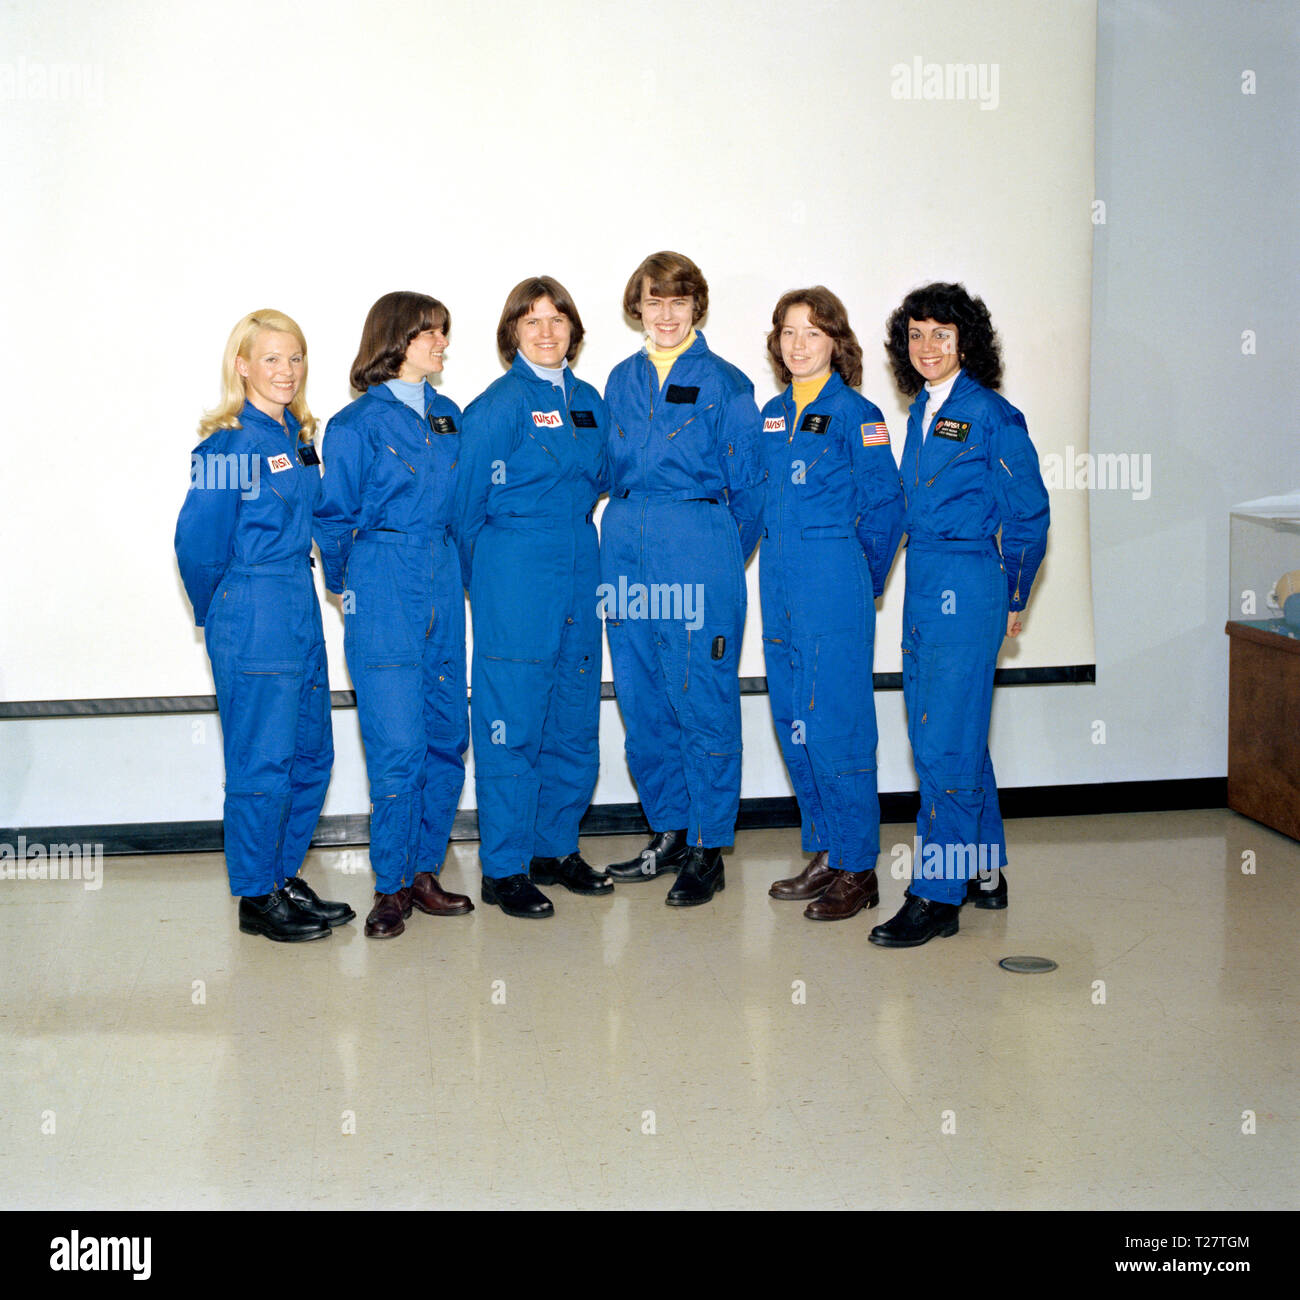 S79-29594 (28 Feb 1979) --- Sporting their new Shuttle-type constant-wear garments, these six astronaut candidates pose for a picture in the crew systems laboratory at the Johnson Space Center (JSC).  From left to right are Rhea Seddon, Sally K. Ride, Kathryn D. Sullivan, Shannon W. Lucid, Anna L. Fisher and Judith A. Resnik. Stock Photo